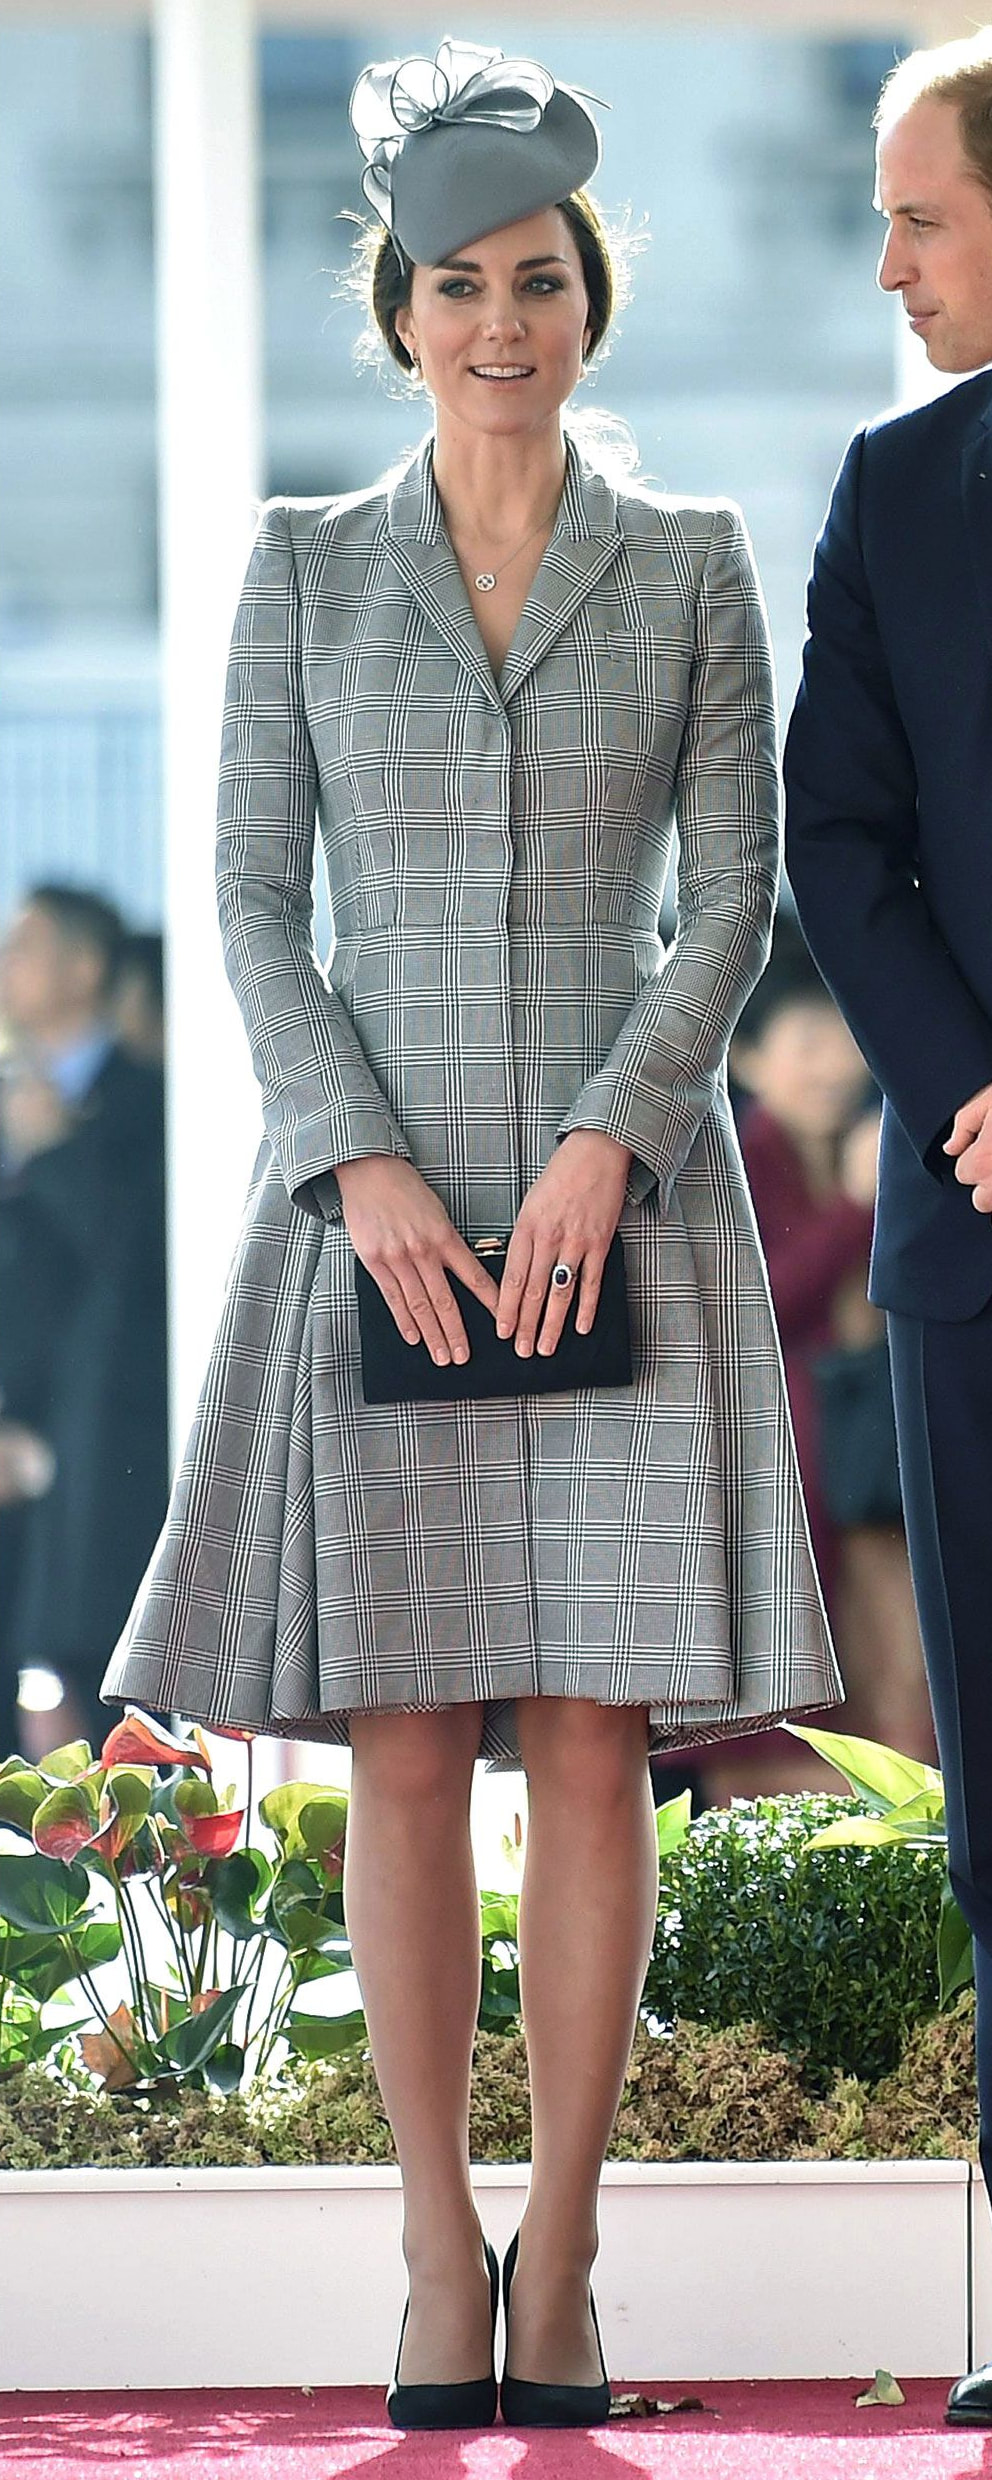 Alexander McQueen Plaid Box Pleat Coat as seen on Kate Middleton, The Duchess of Cambridge.